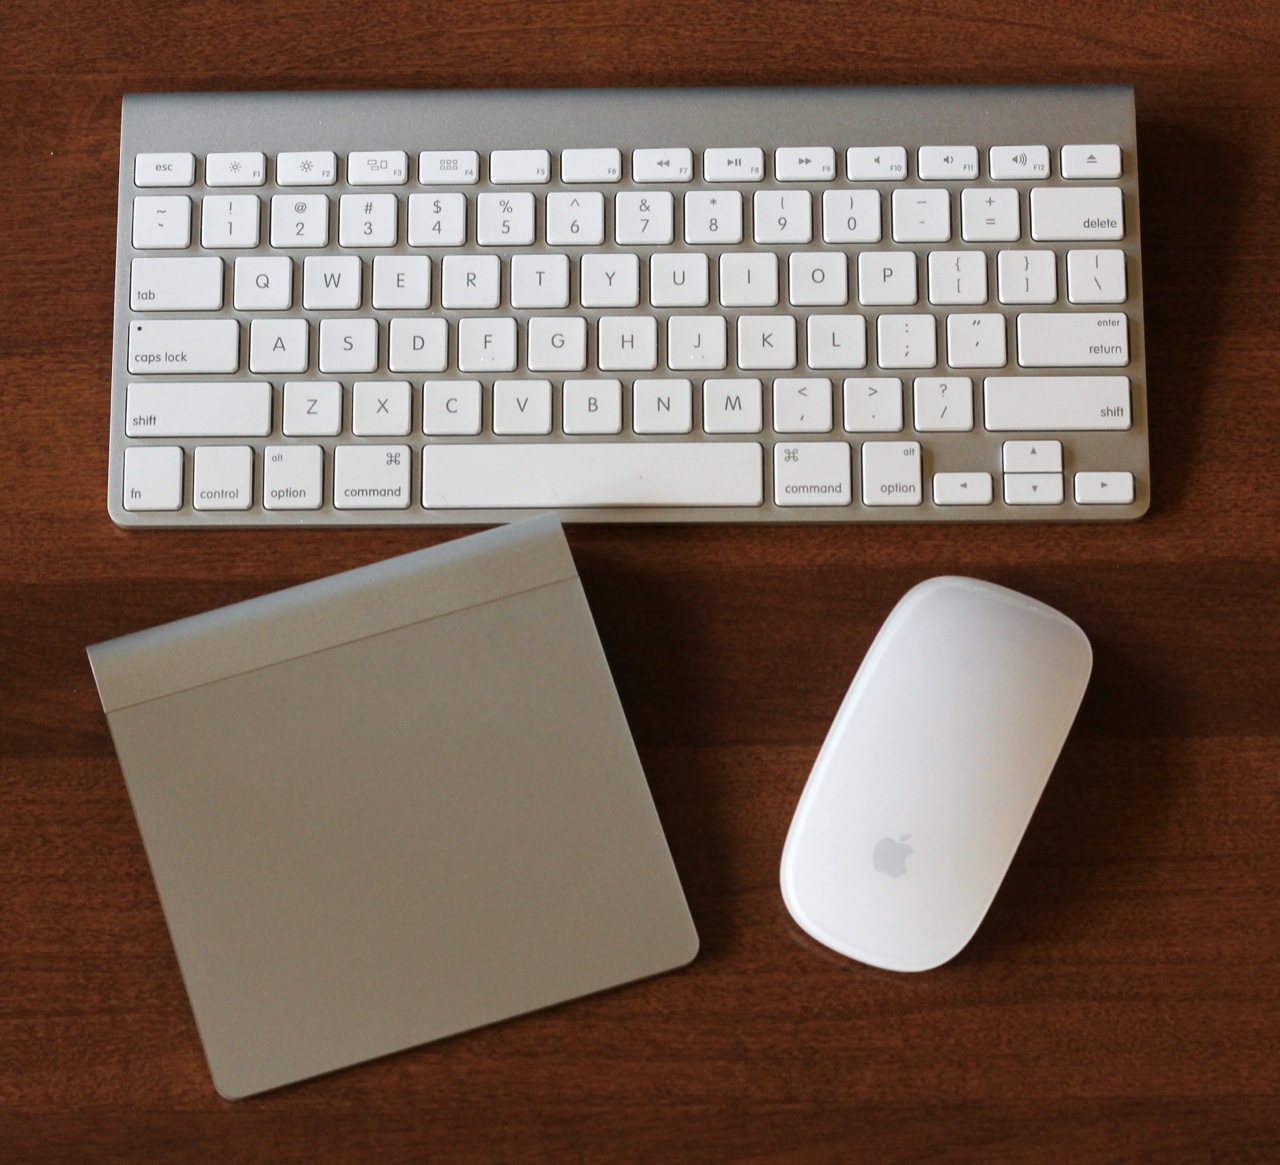 share mouse and keyboard mac